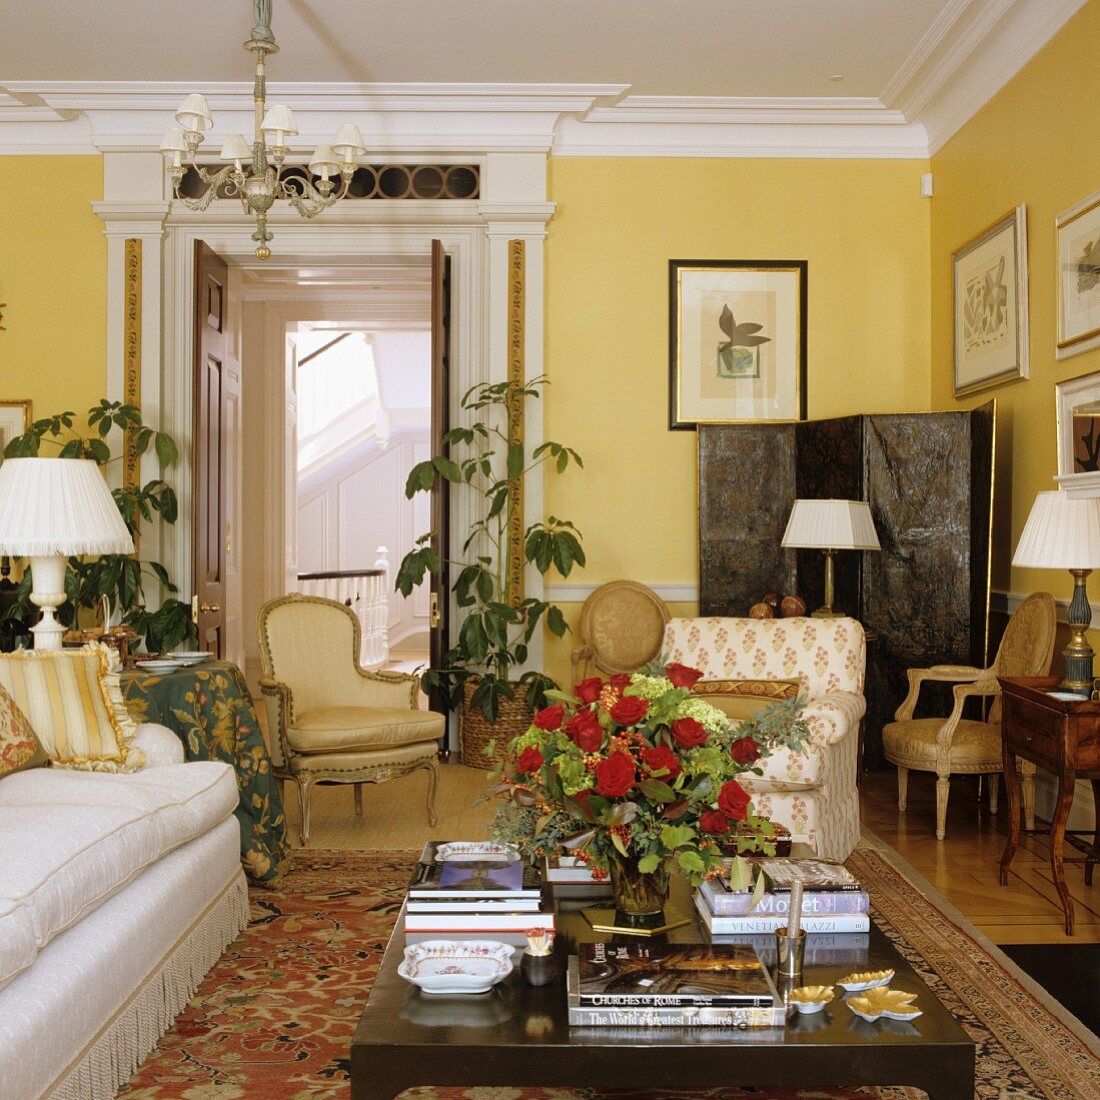 Grand living in room in yellow with sofa and antique armchairs around coffee table